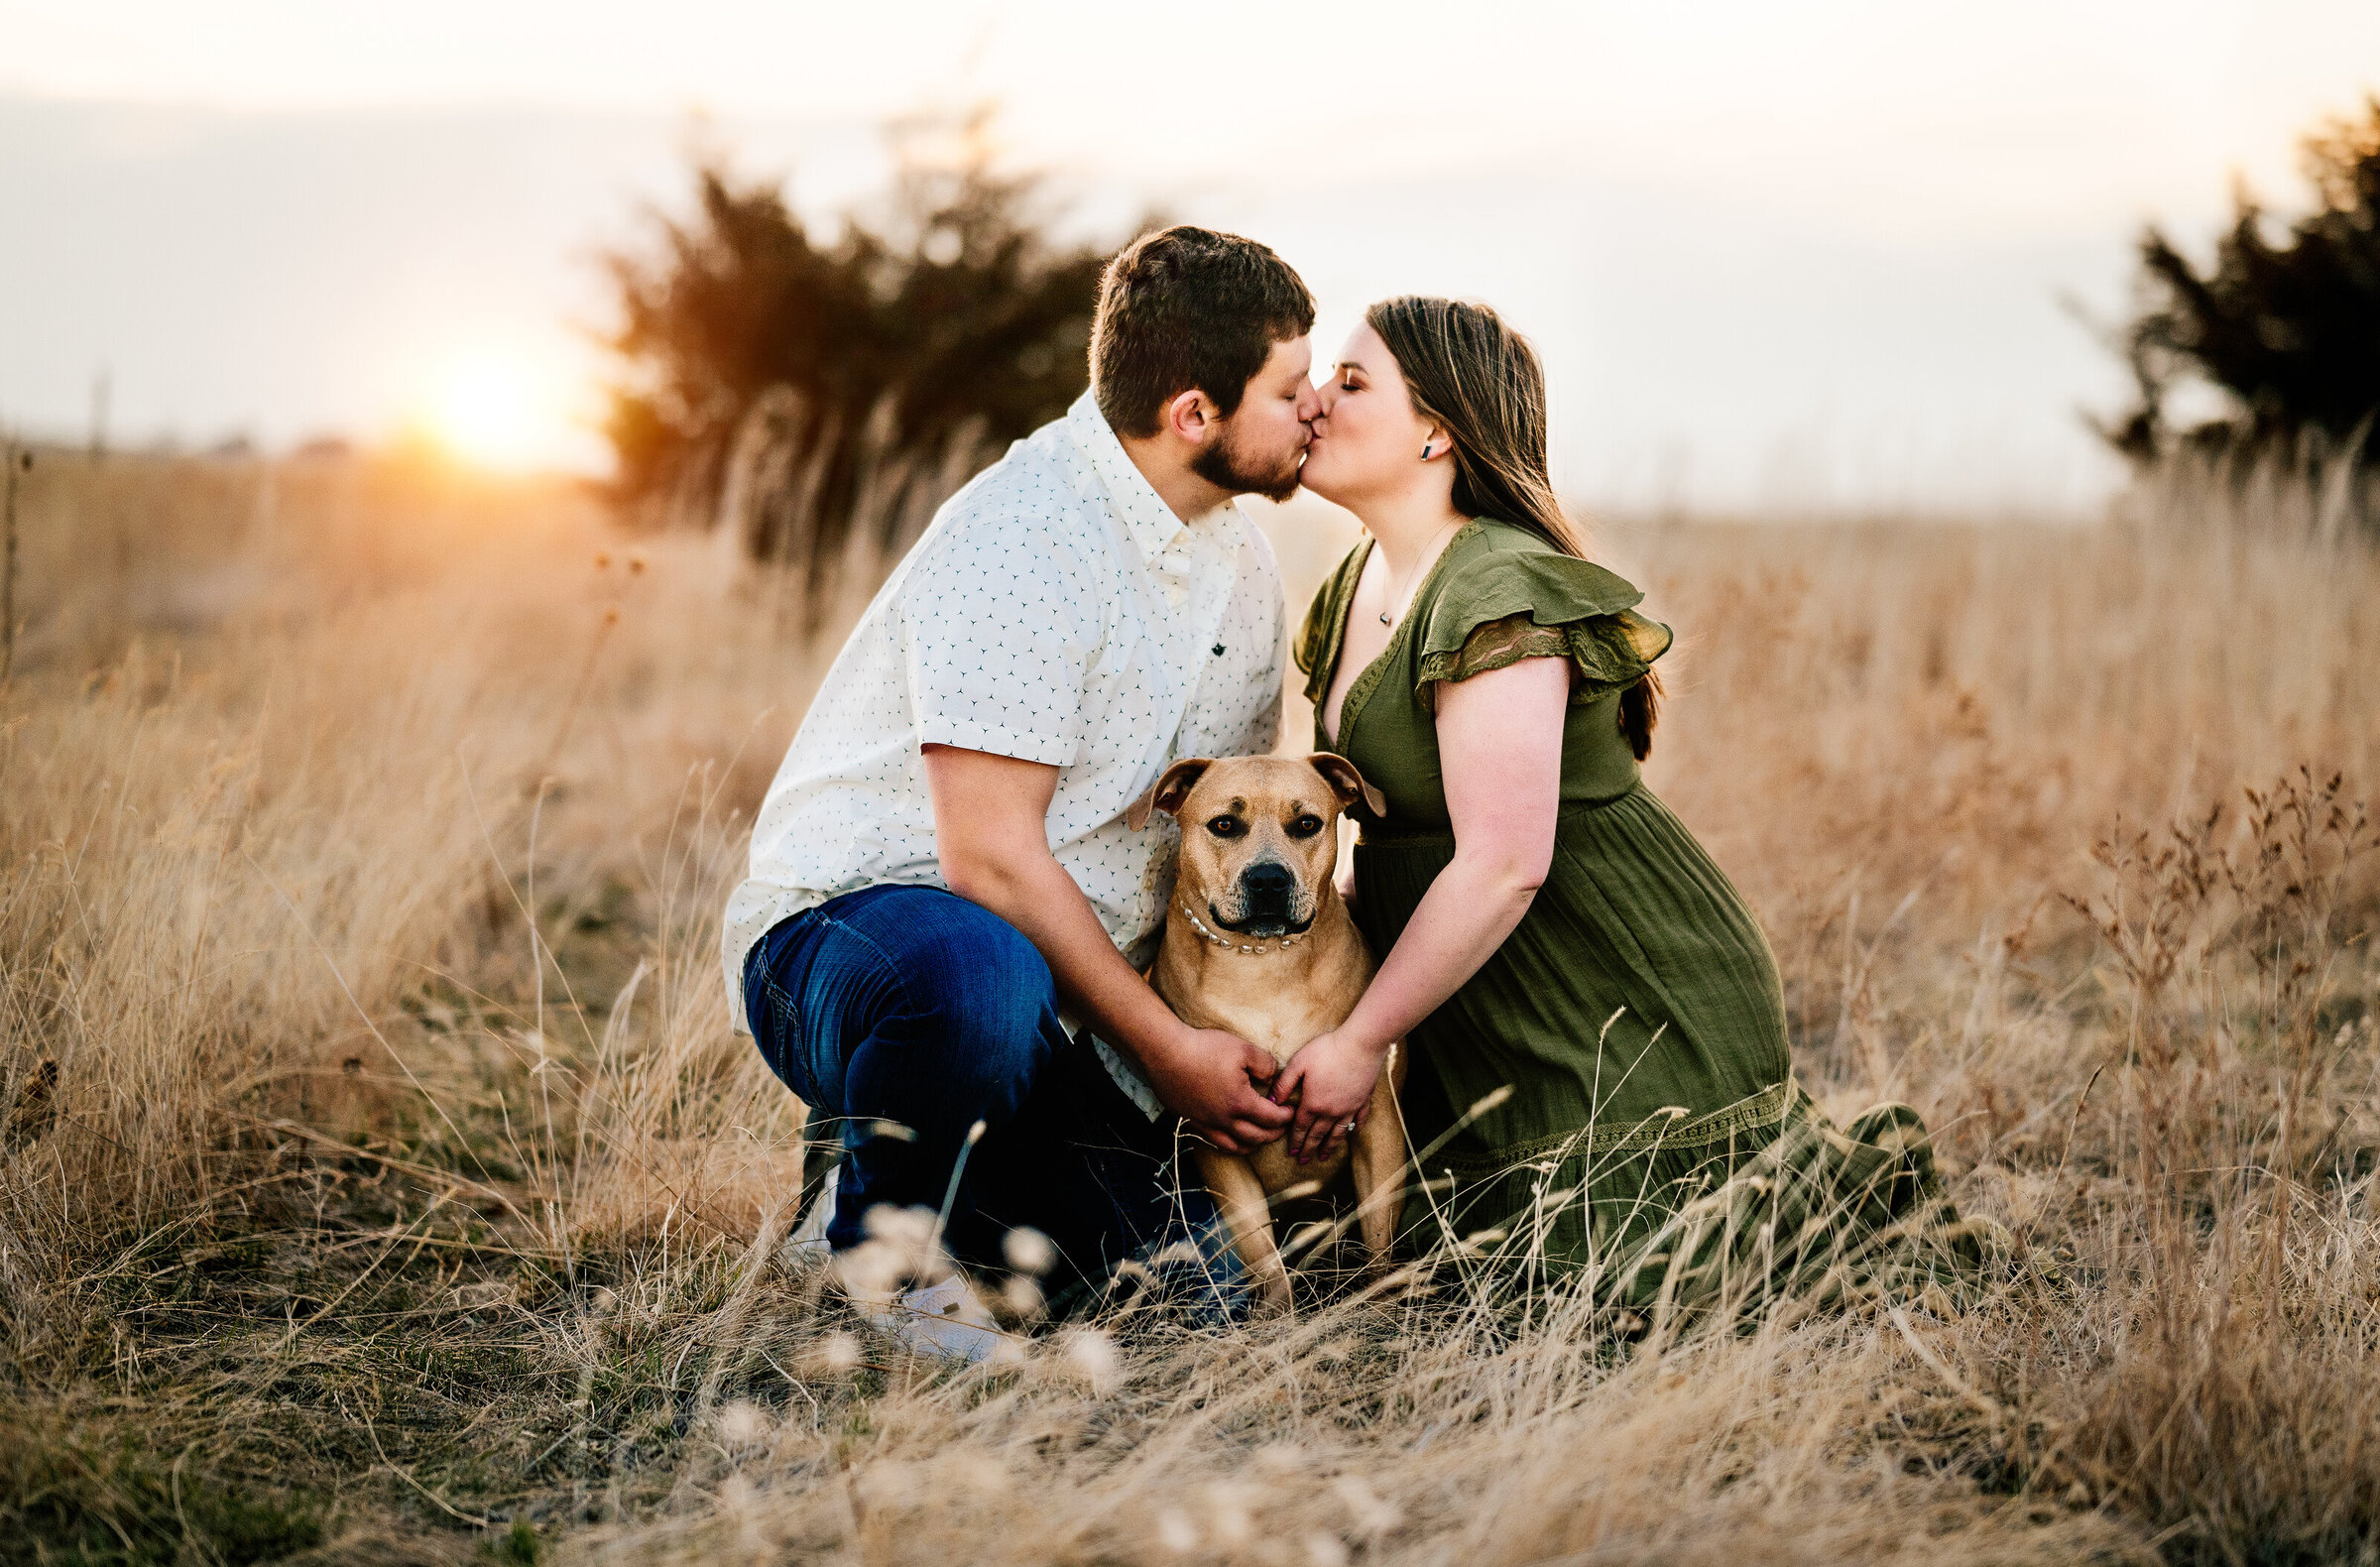 Couple kisses over their dog in field